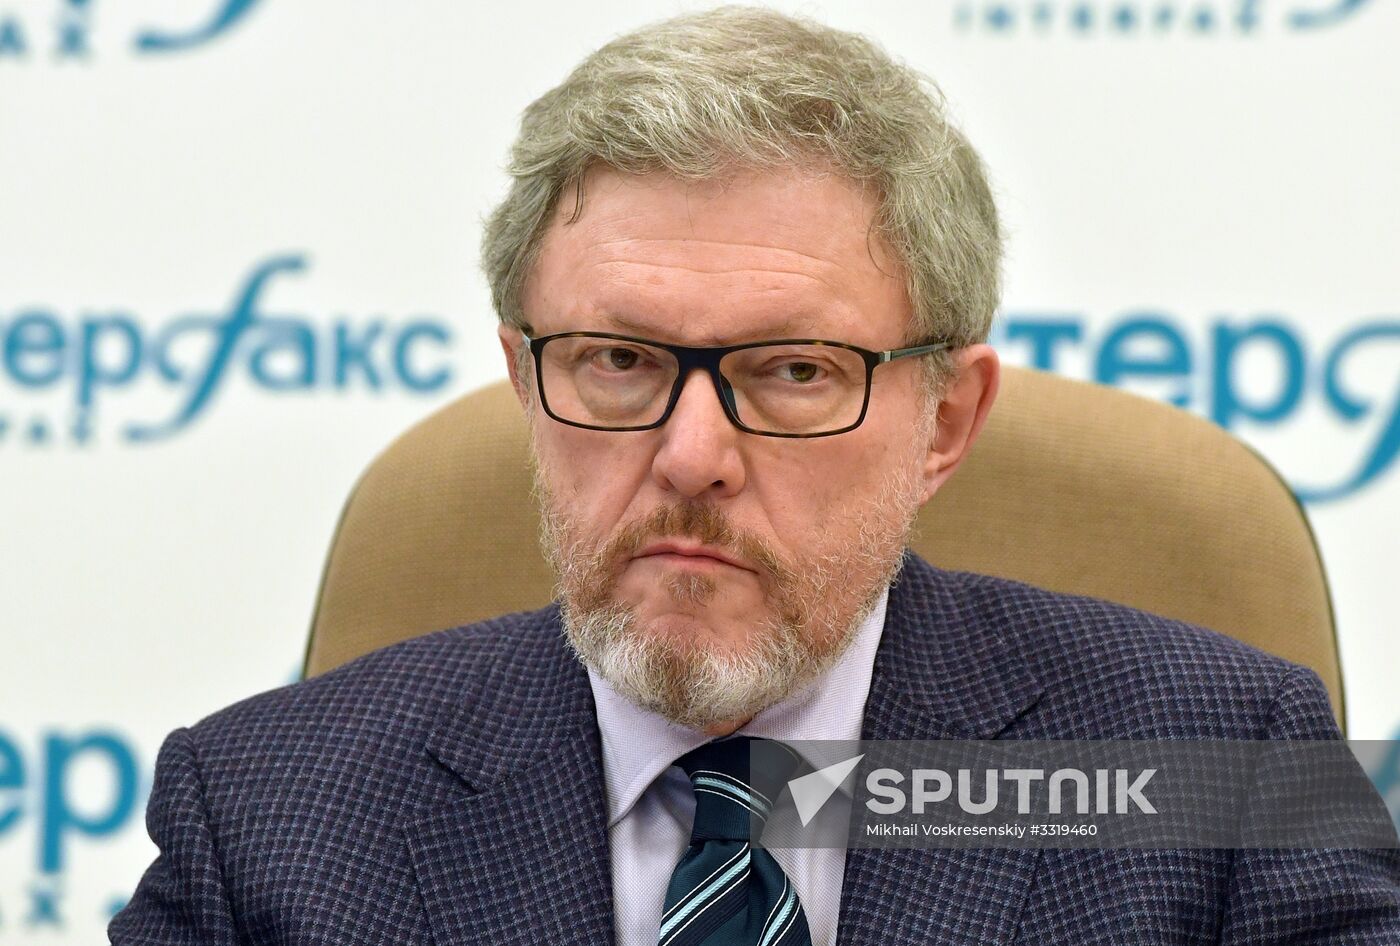 News conference by presidential candidate Grigory Yavlinsky